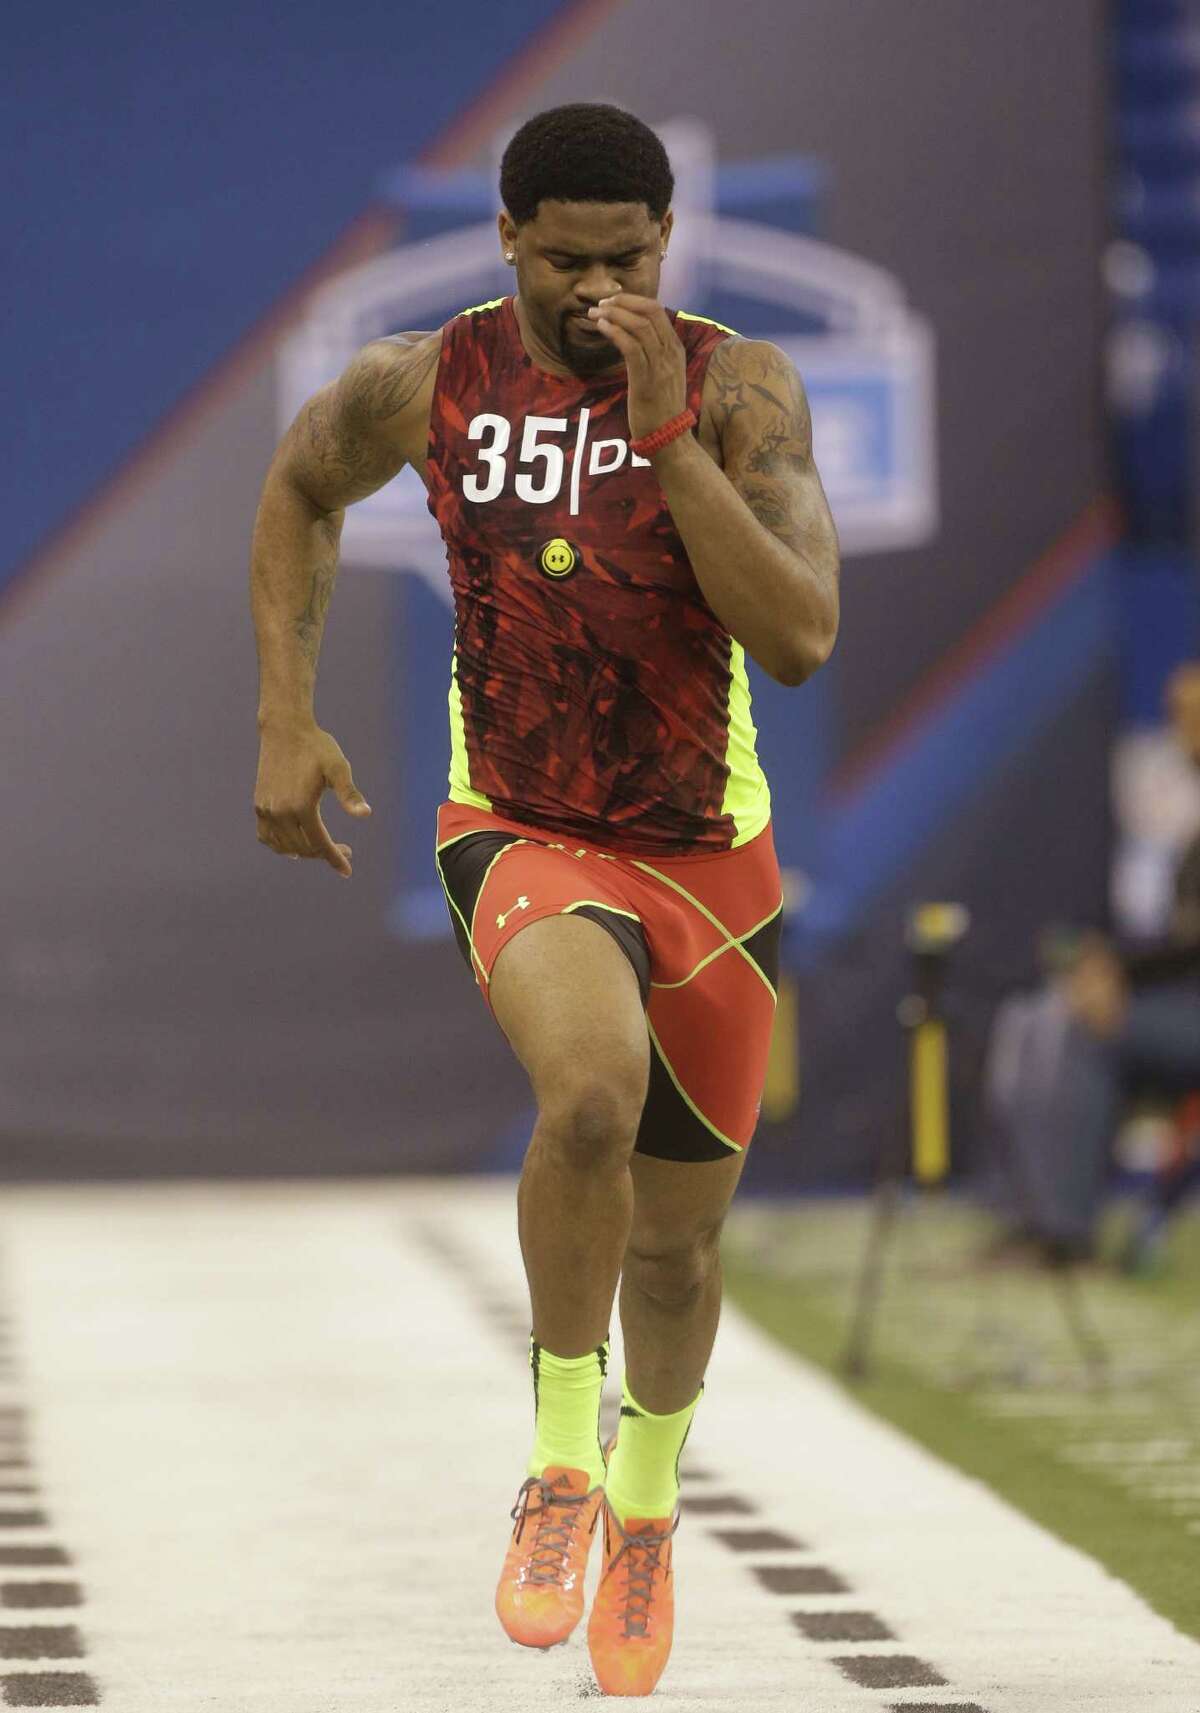 Texas A&M defensive end Damontre Moore posted a disappointing time of 4.95 seconds in the 40-yard dash in the recent NFL Scouting Combine.